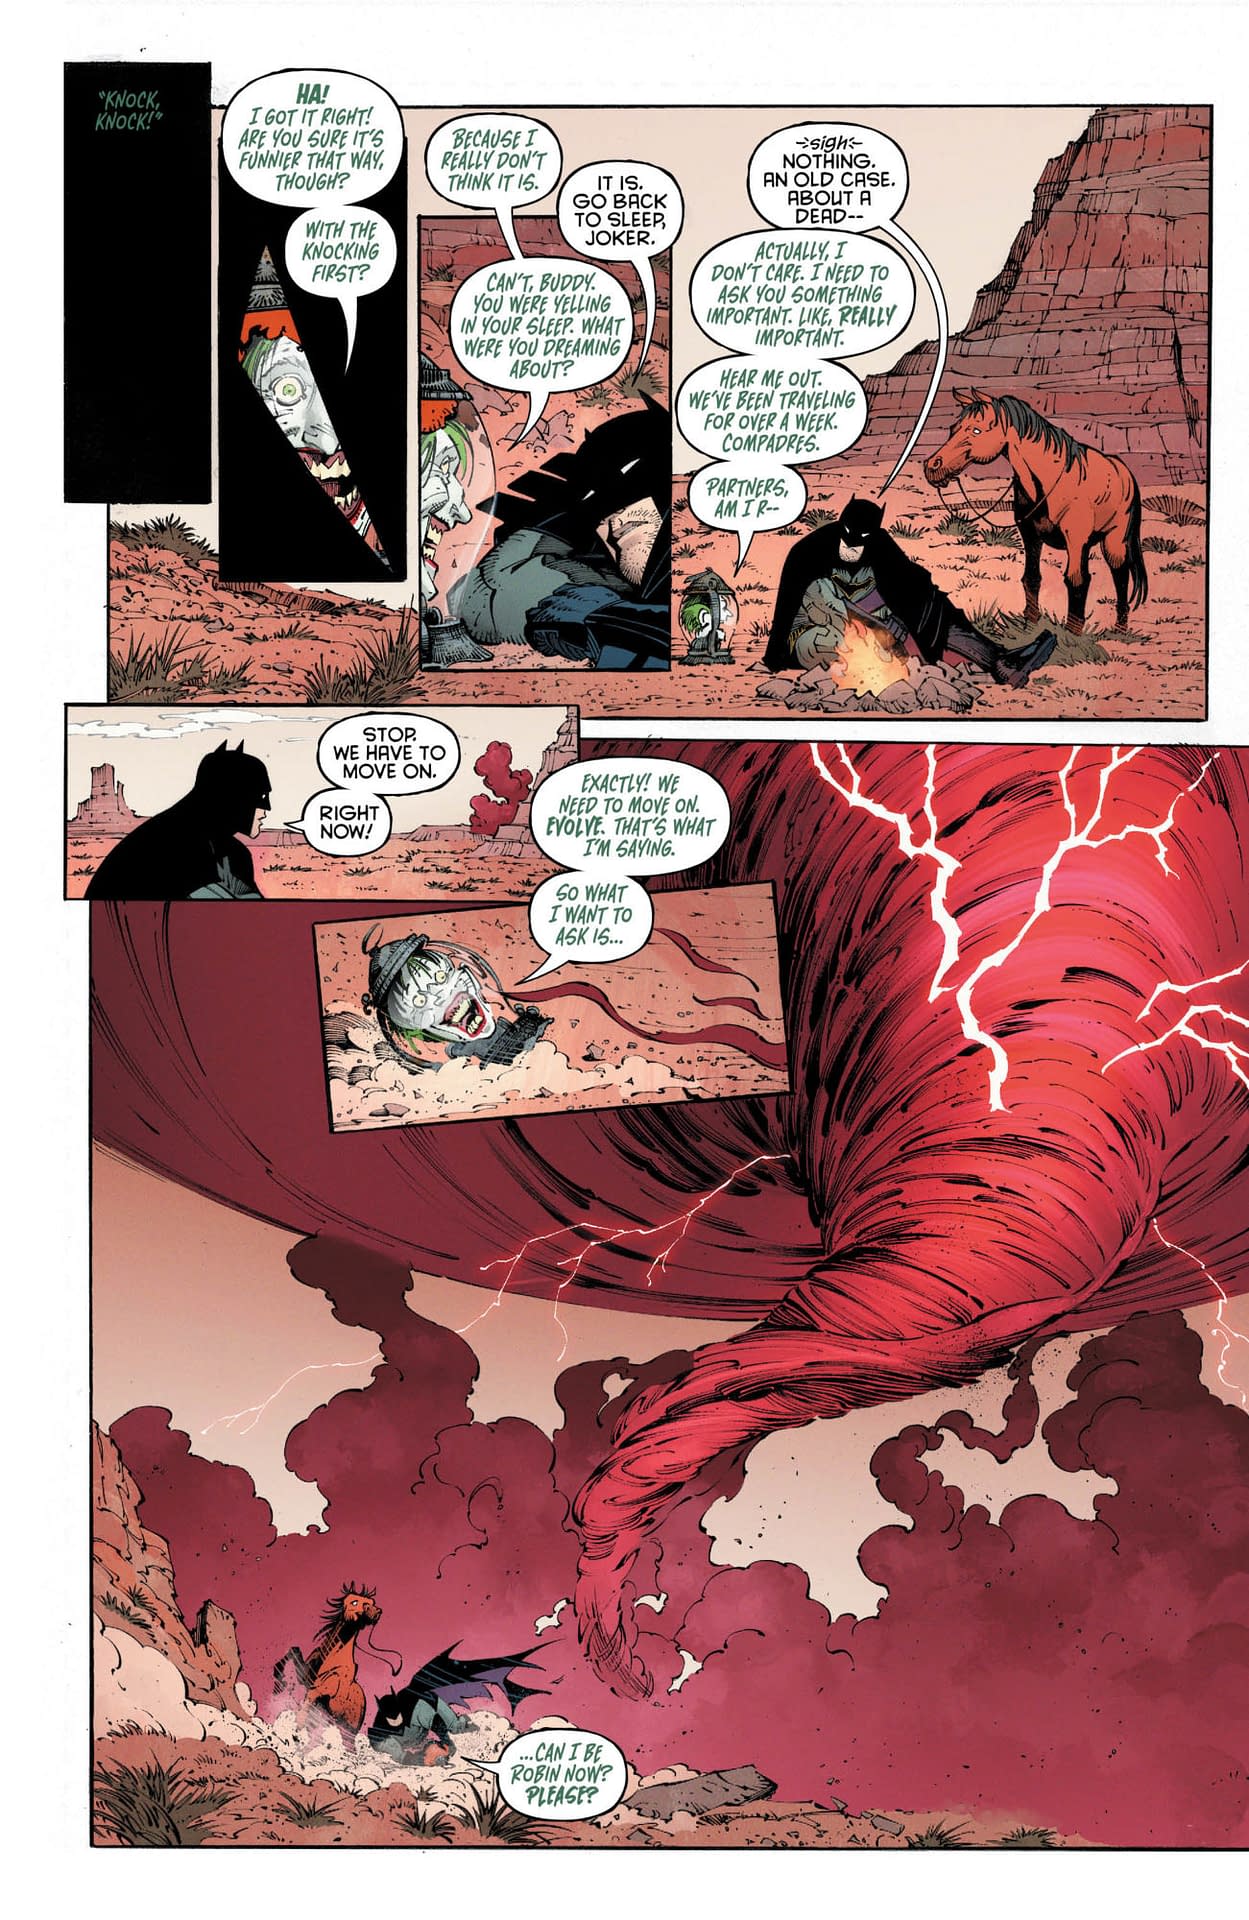 Could the Joker be Batman's Last Robin? Last Knight on Earth #2 Preview